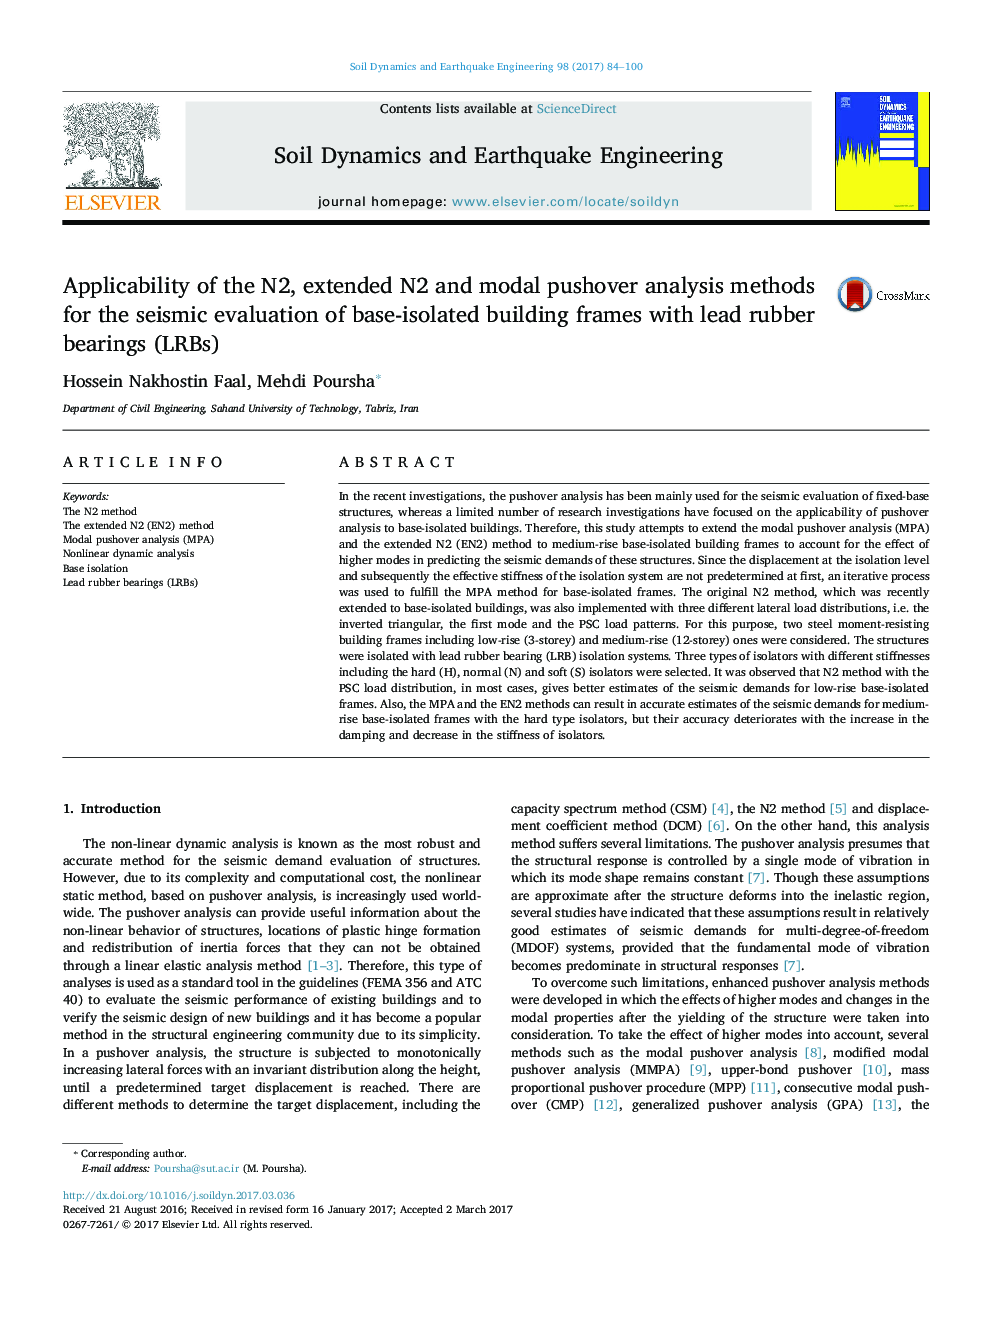 Applicability of the N2, extended N2 and modal pushover analysis methods for the seismic evaluation of base-isolated building frames with lead rubber bearings (LRBs)